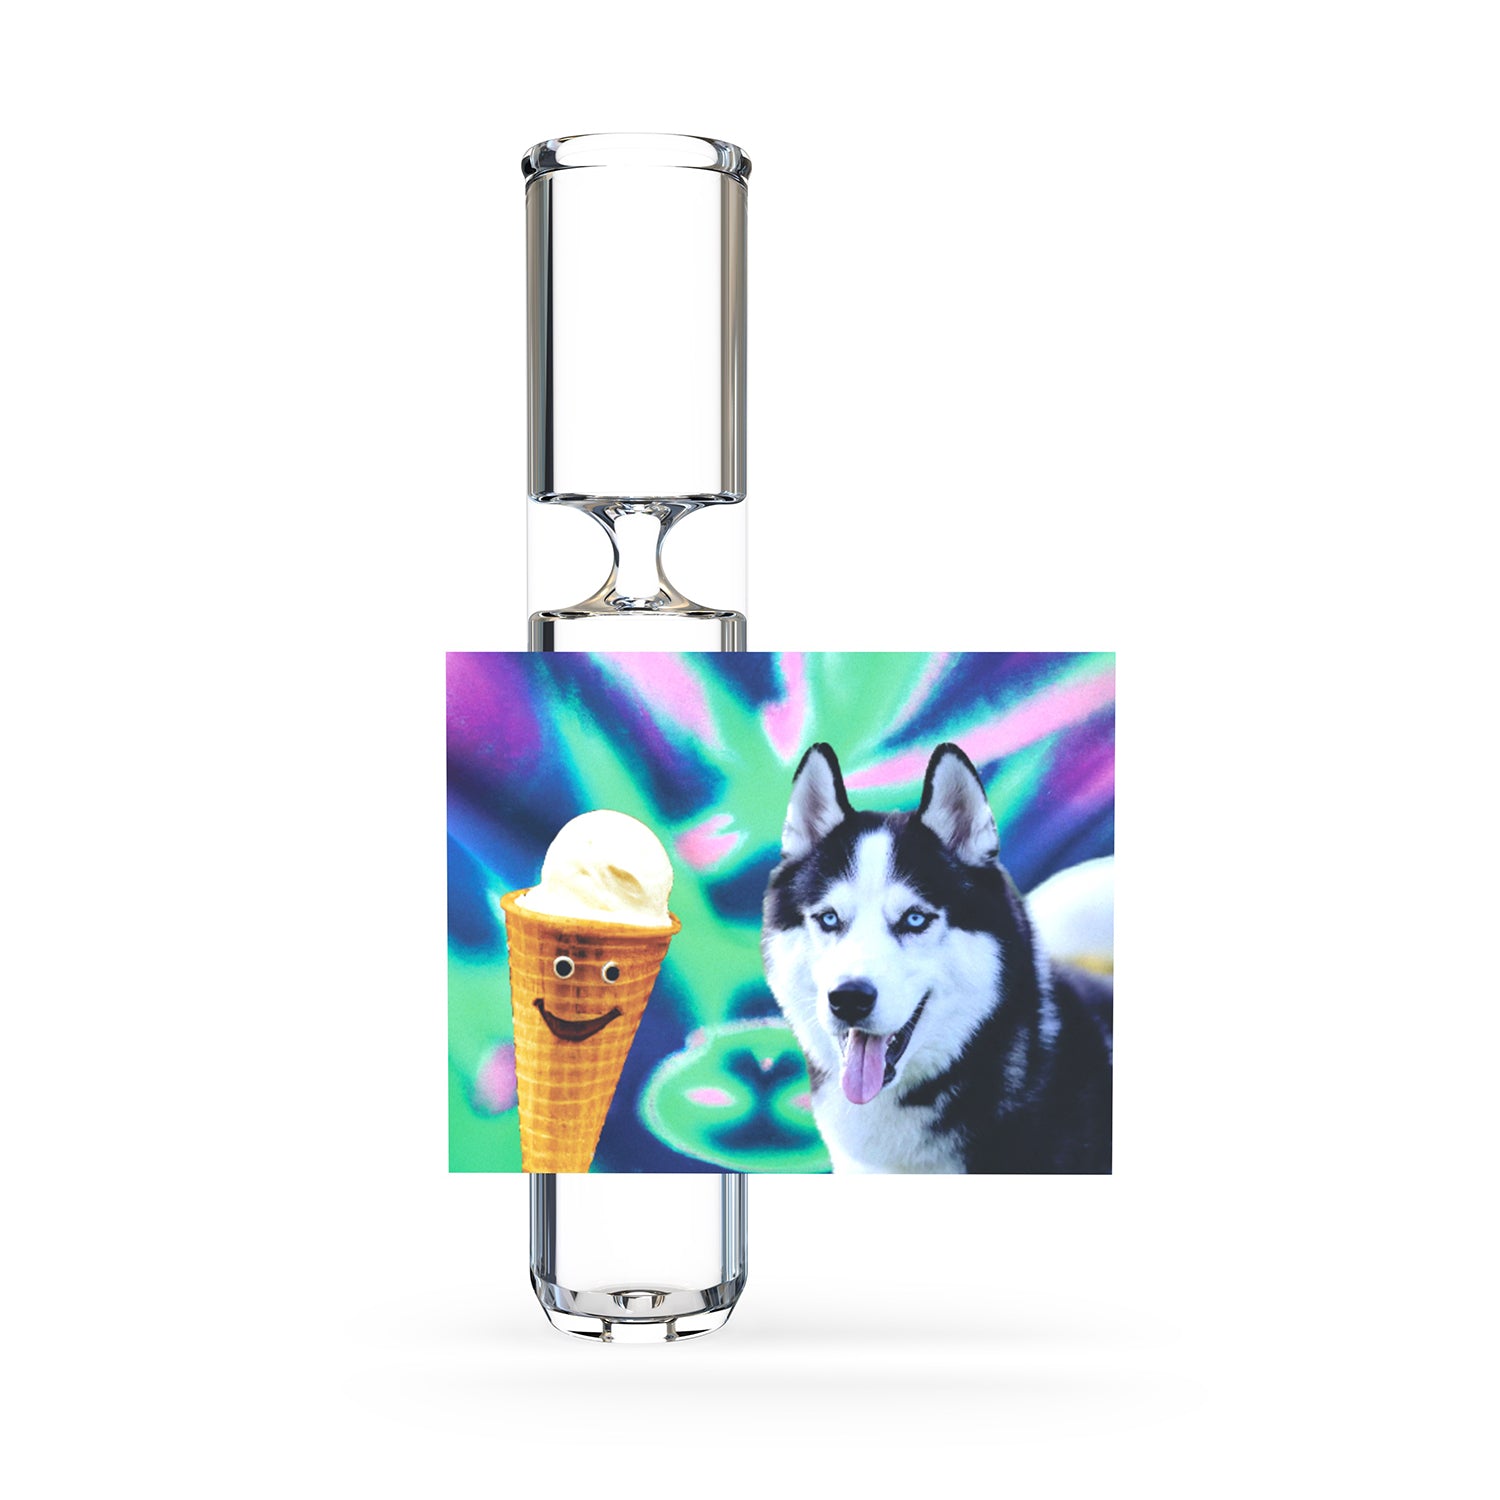 Weed pipe for dog lovers. Husky dog design one hitter